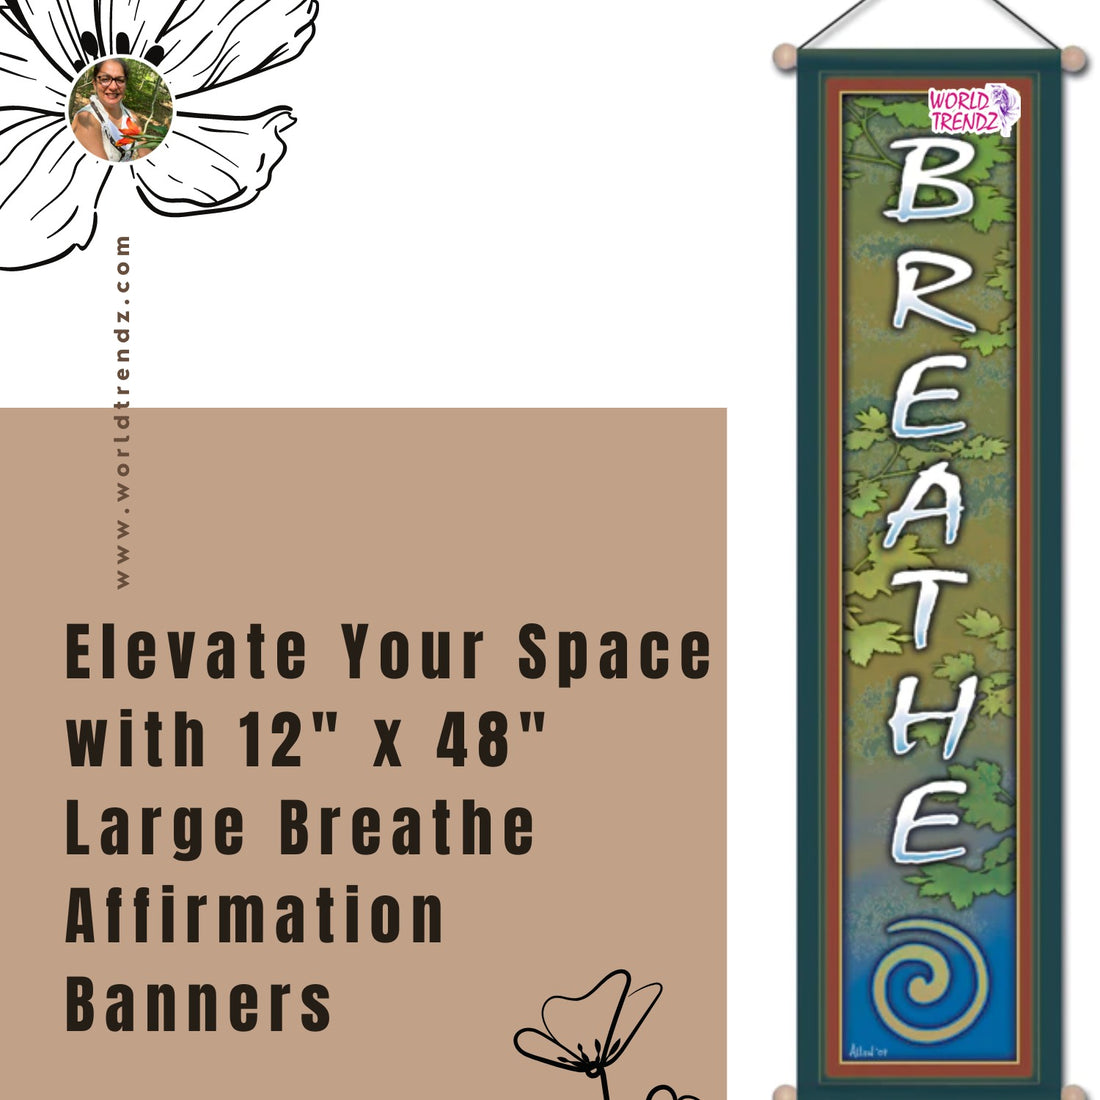 Discover the Benefits of Positive Affirmations with 12" x 48" Large Breathe Affirmation Banners